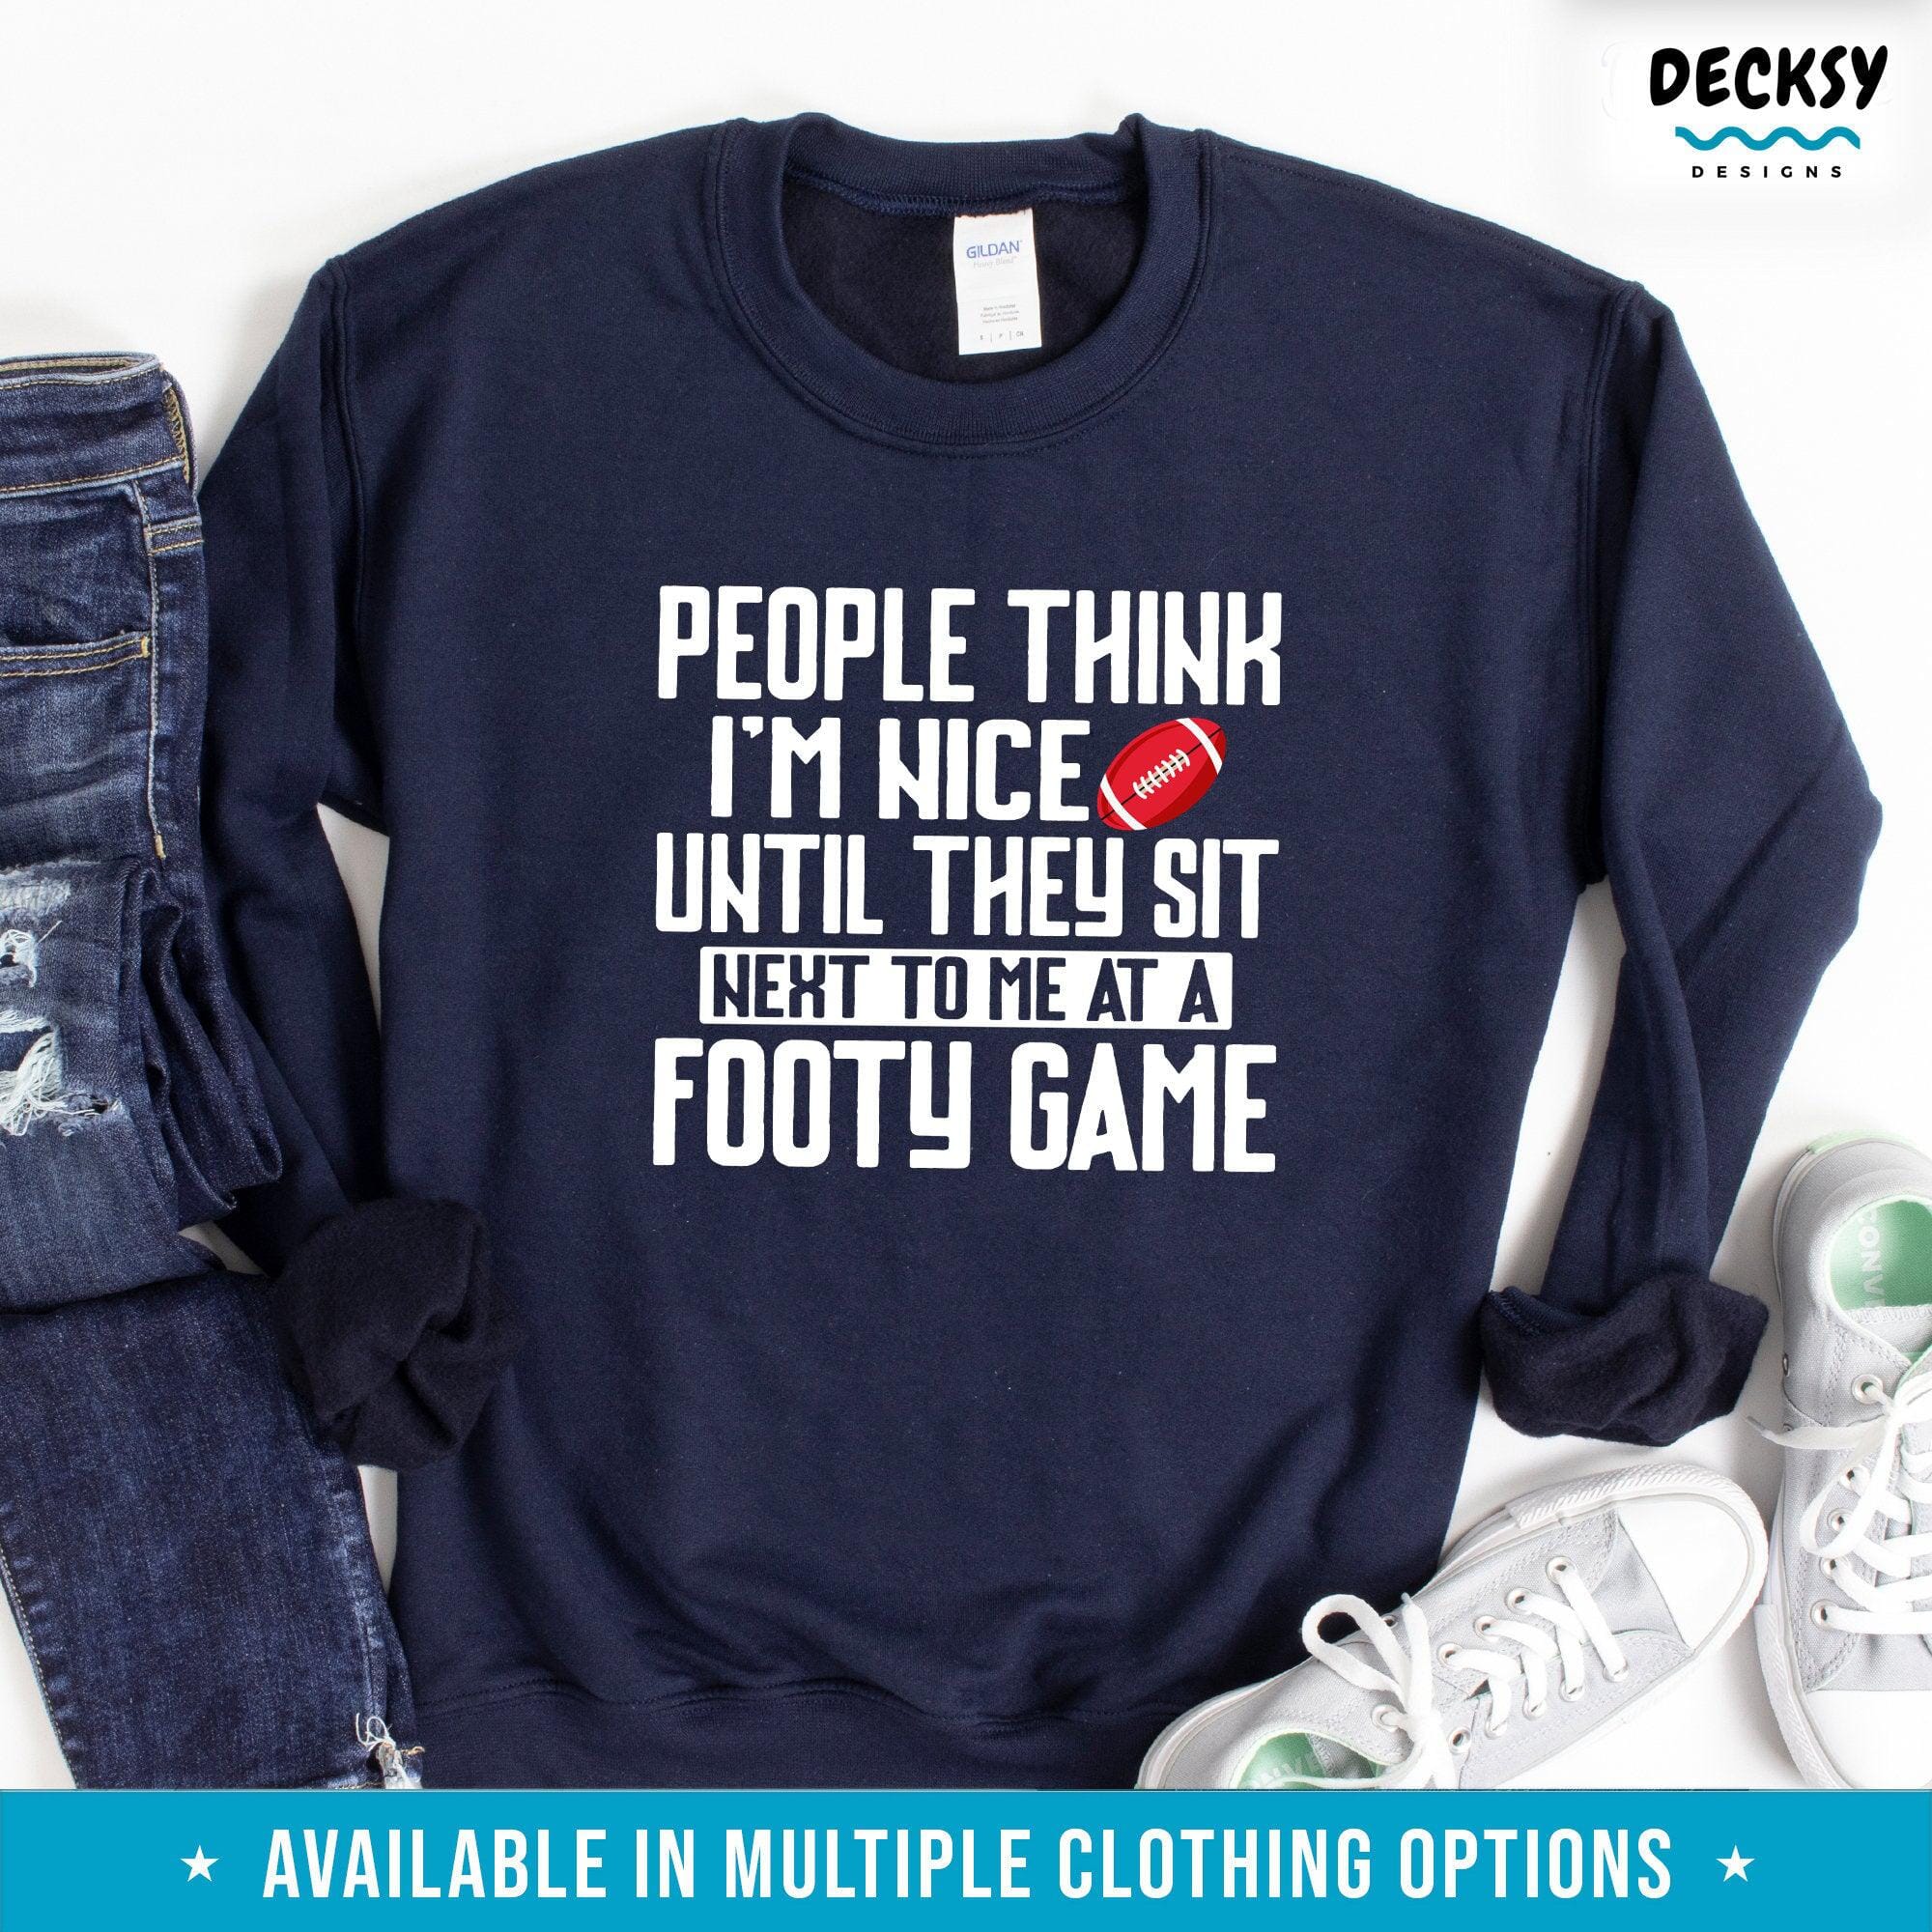 Football Lover Gift, Sports Shirt-Clothing:Gender-Neutral Adult Clothing:Tops & Tees:T-shirts:Graphic Tees-DecksyDesigns